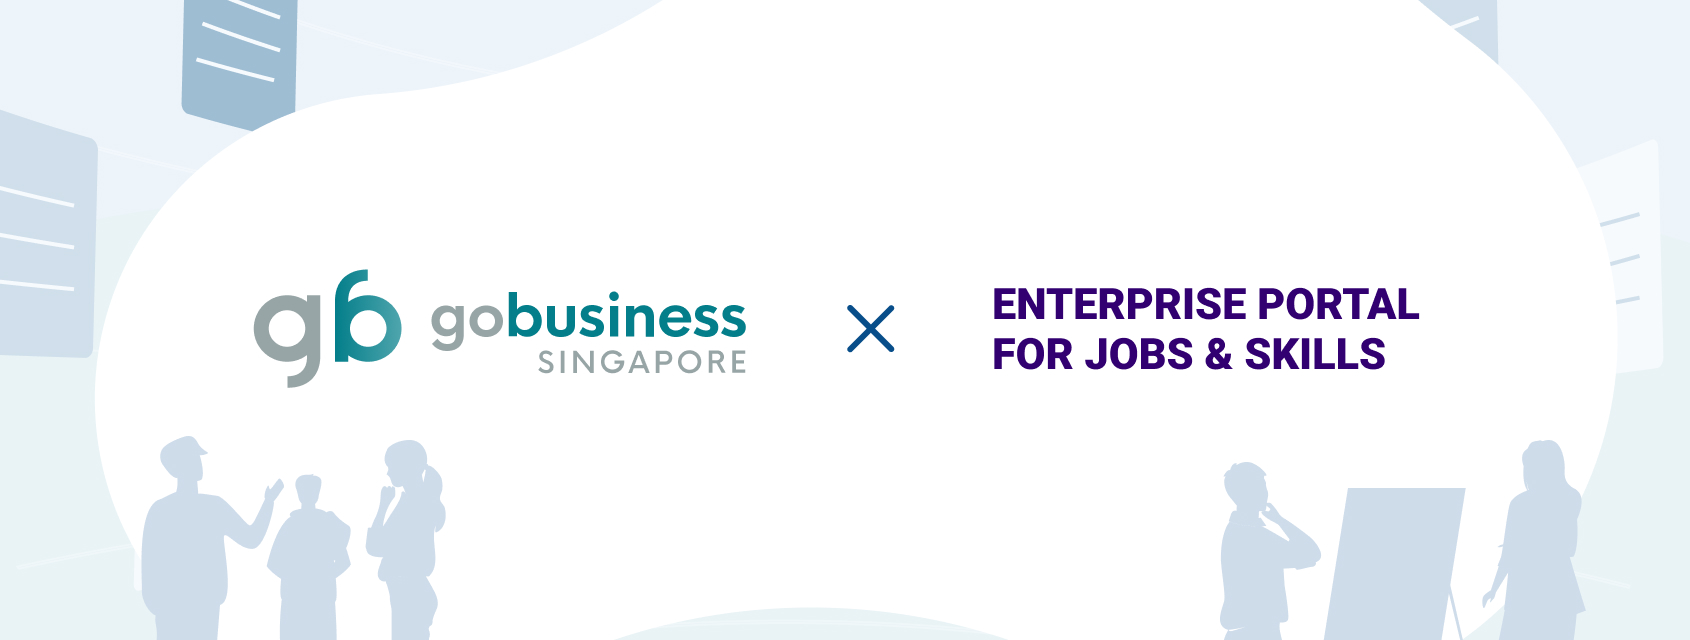 Graphic showing the logos for GoBusiness Singapore and Enterprise Portal for Jobs and Skills